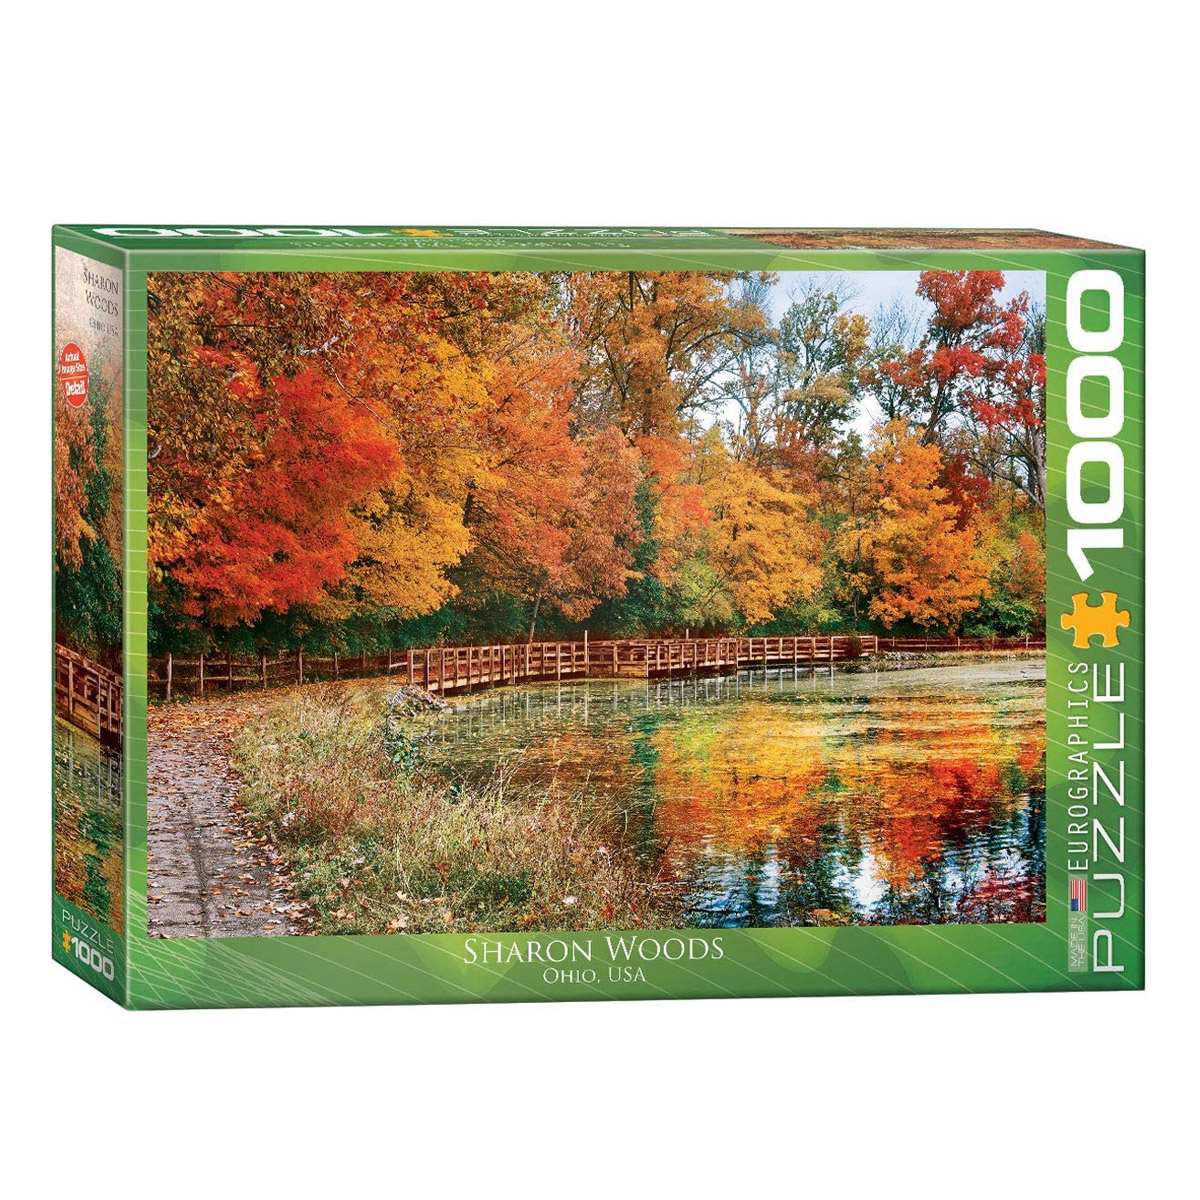 Autumn in an old park,1000 Piezas. Marca Eurographics, Ref: 6000-0979.